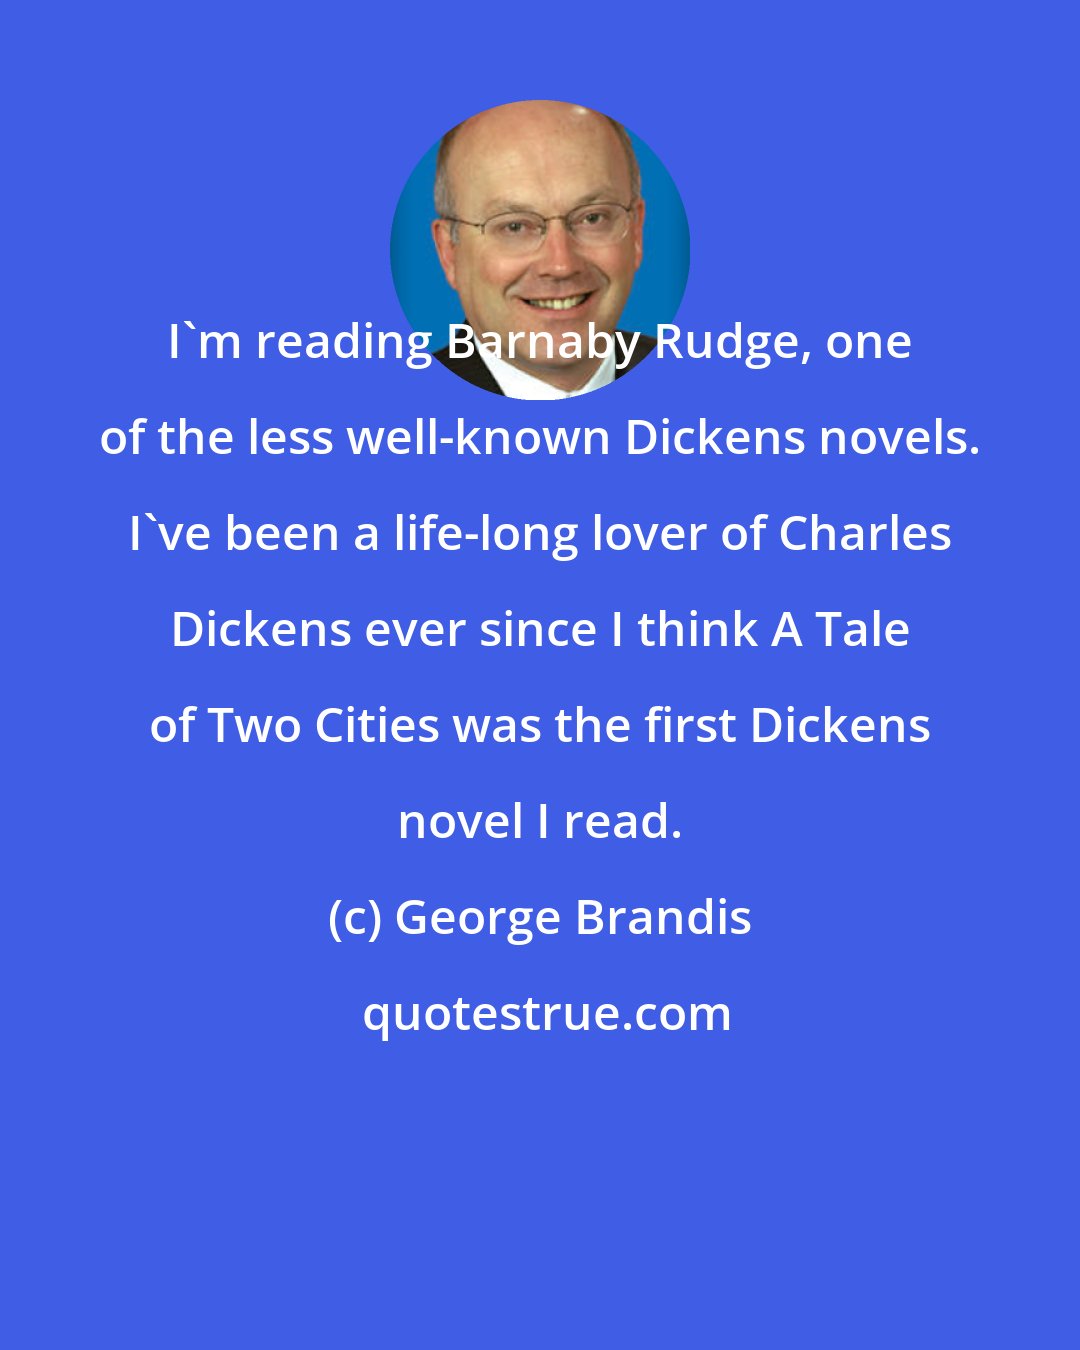 George Brandis: I'm reading Barnaby Rudge, one of the less well-known Dickens novels. I've been a life-long lover of Charles Dickens ever since I think A Tale of Two Cities was the first Dickens novel I read.